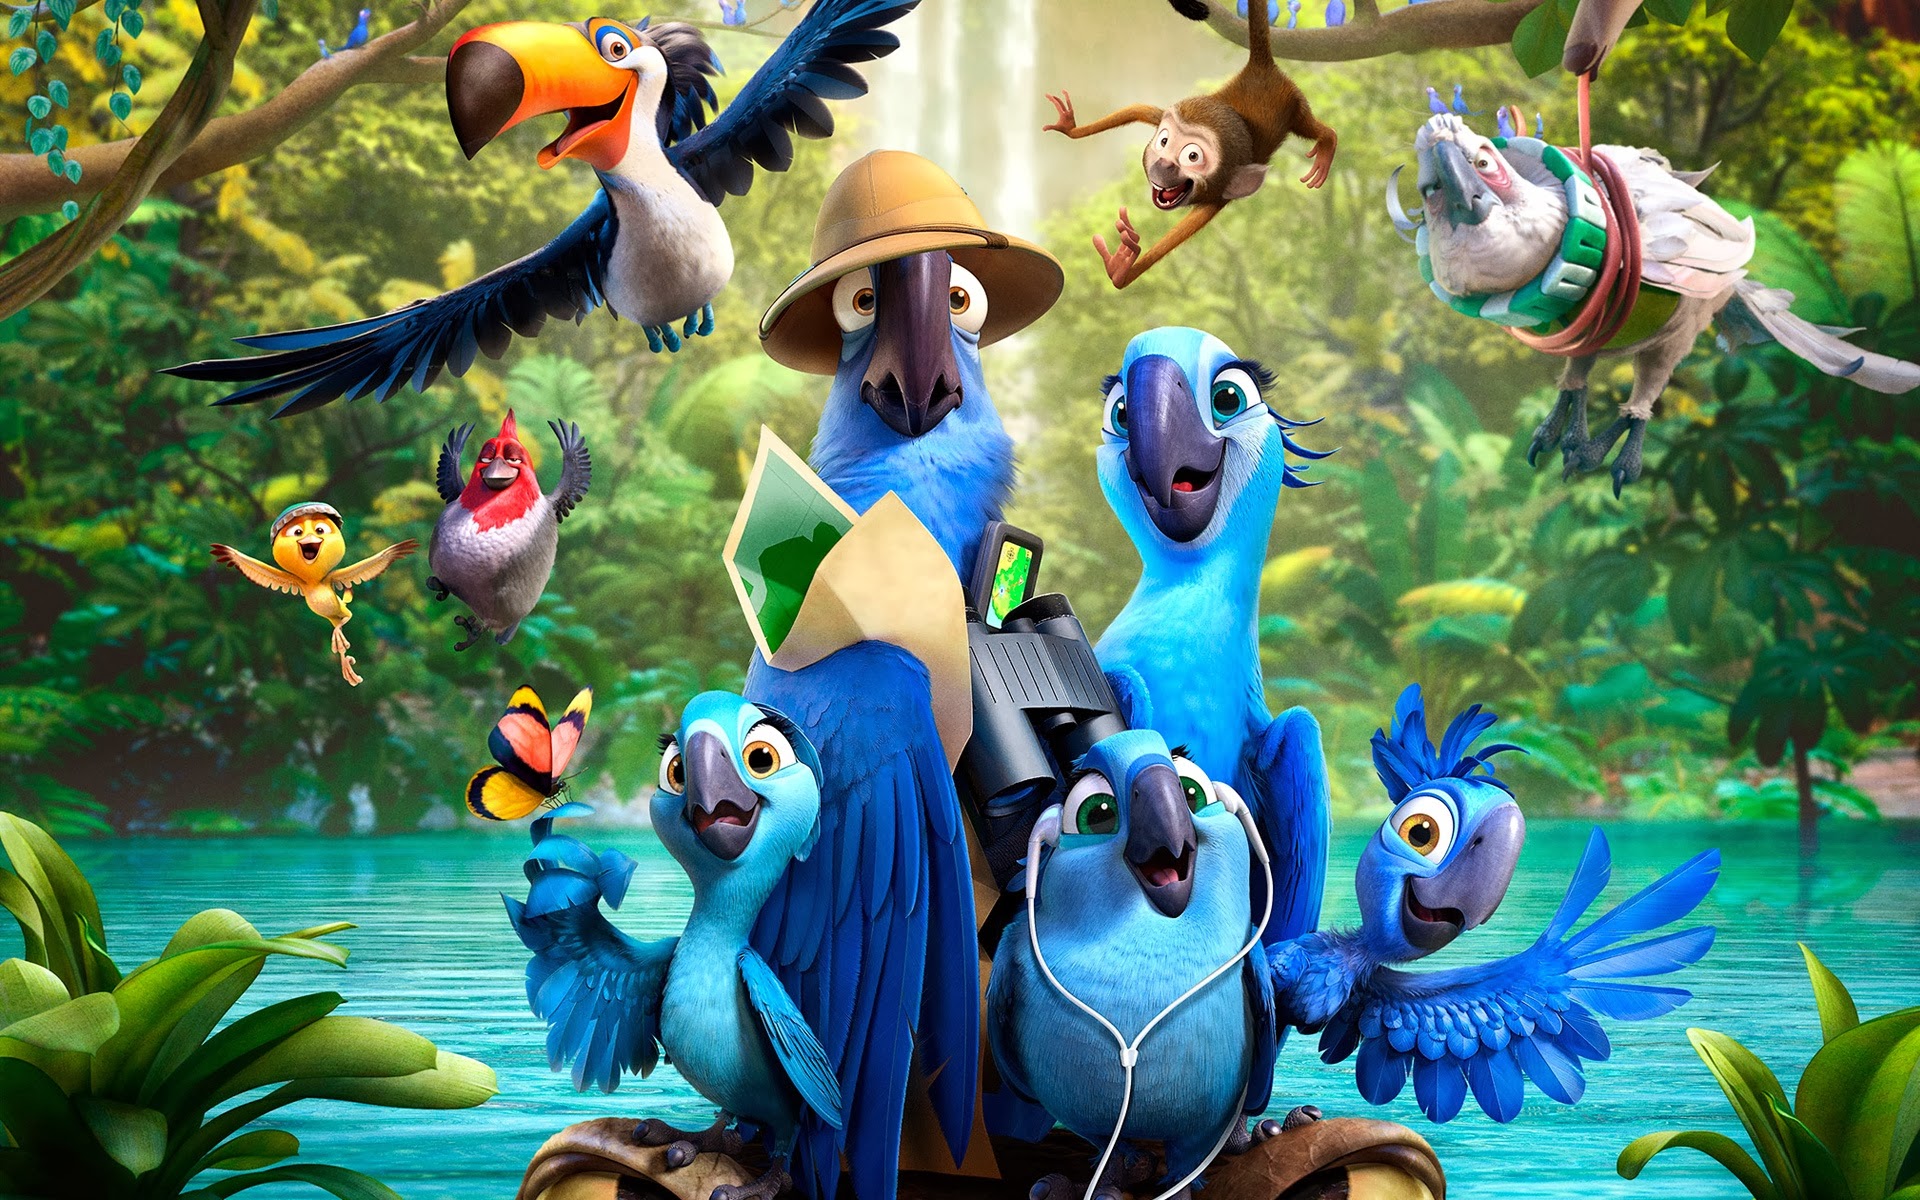 Animated Movies Wallpapers Group - Rio 2 - 1920x1200 Wallpaper 